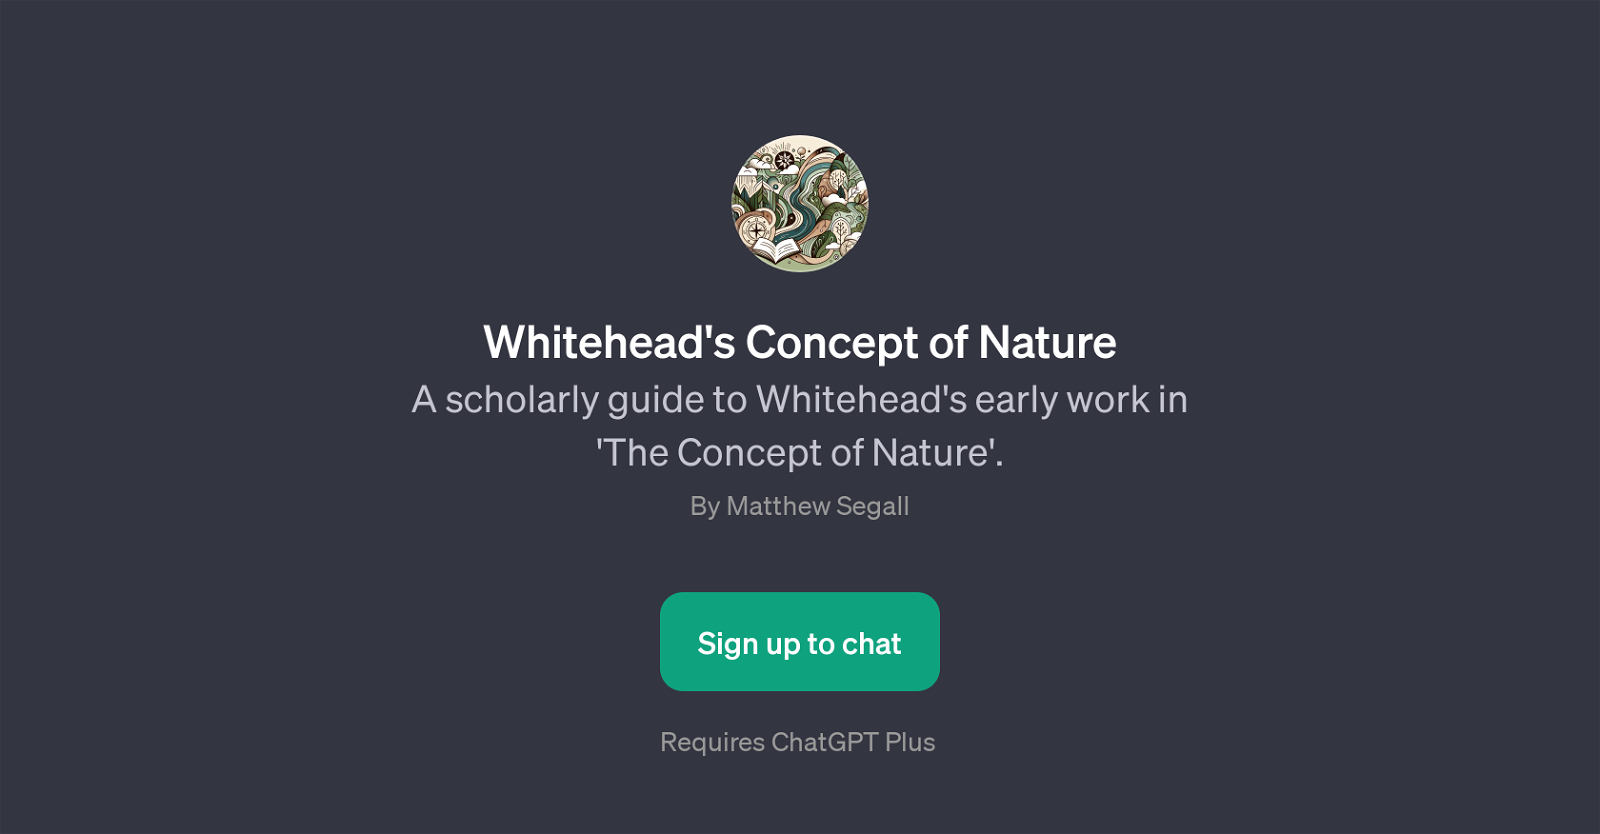 Whitehead's Concept of Nature website